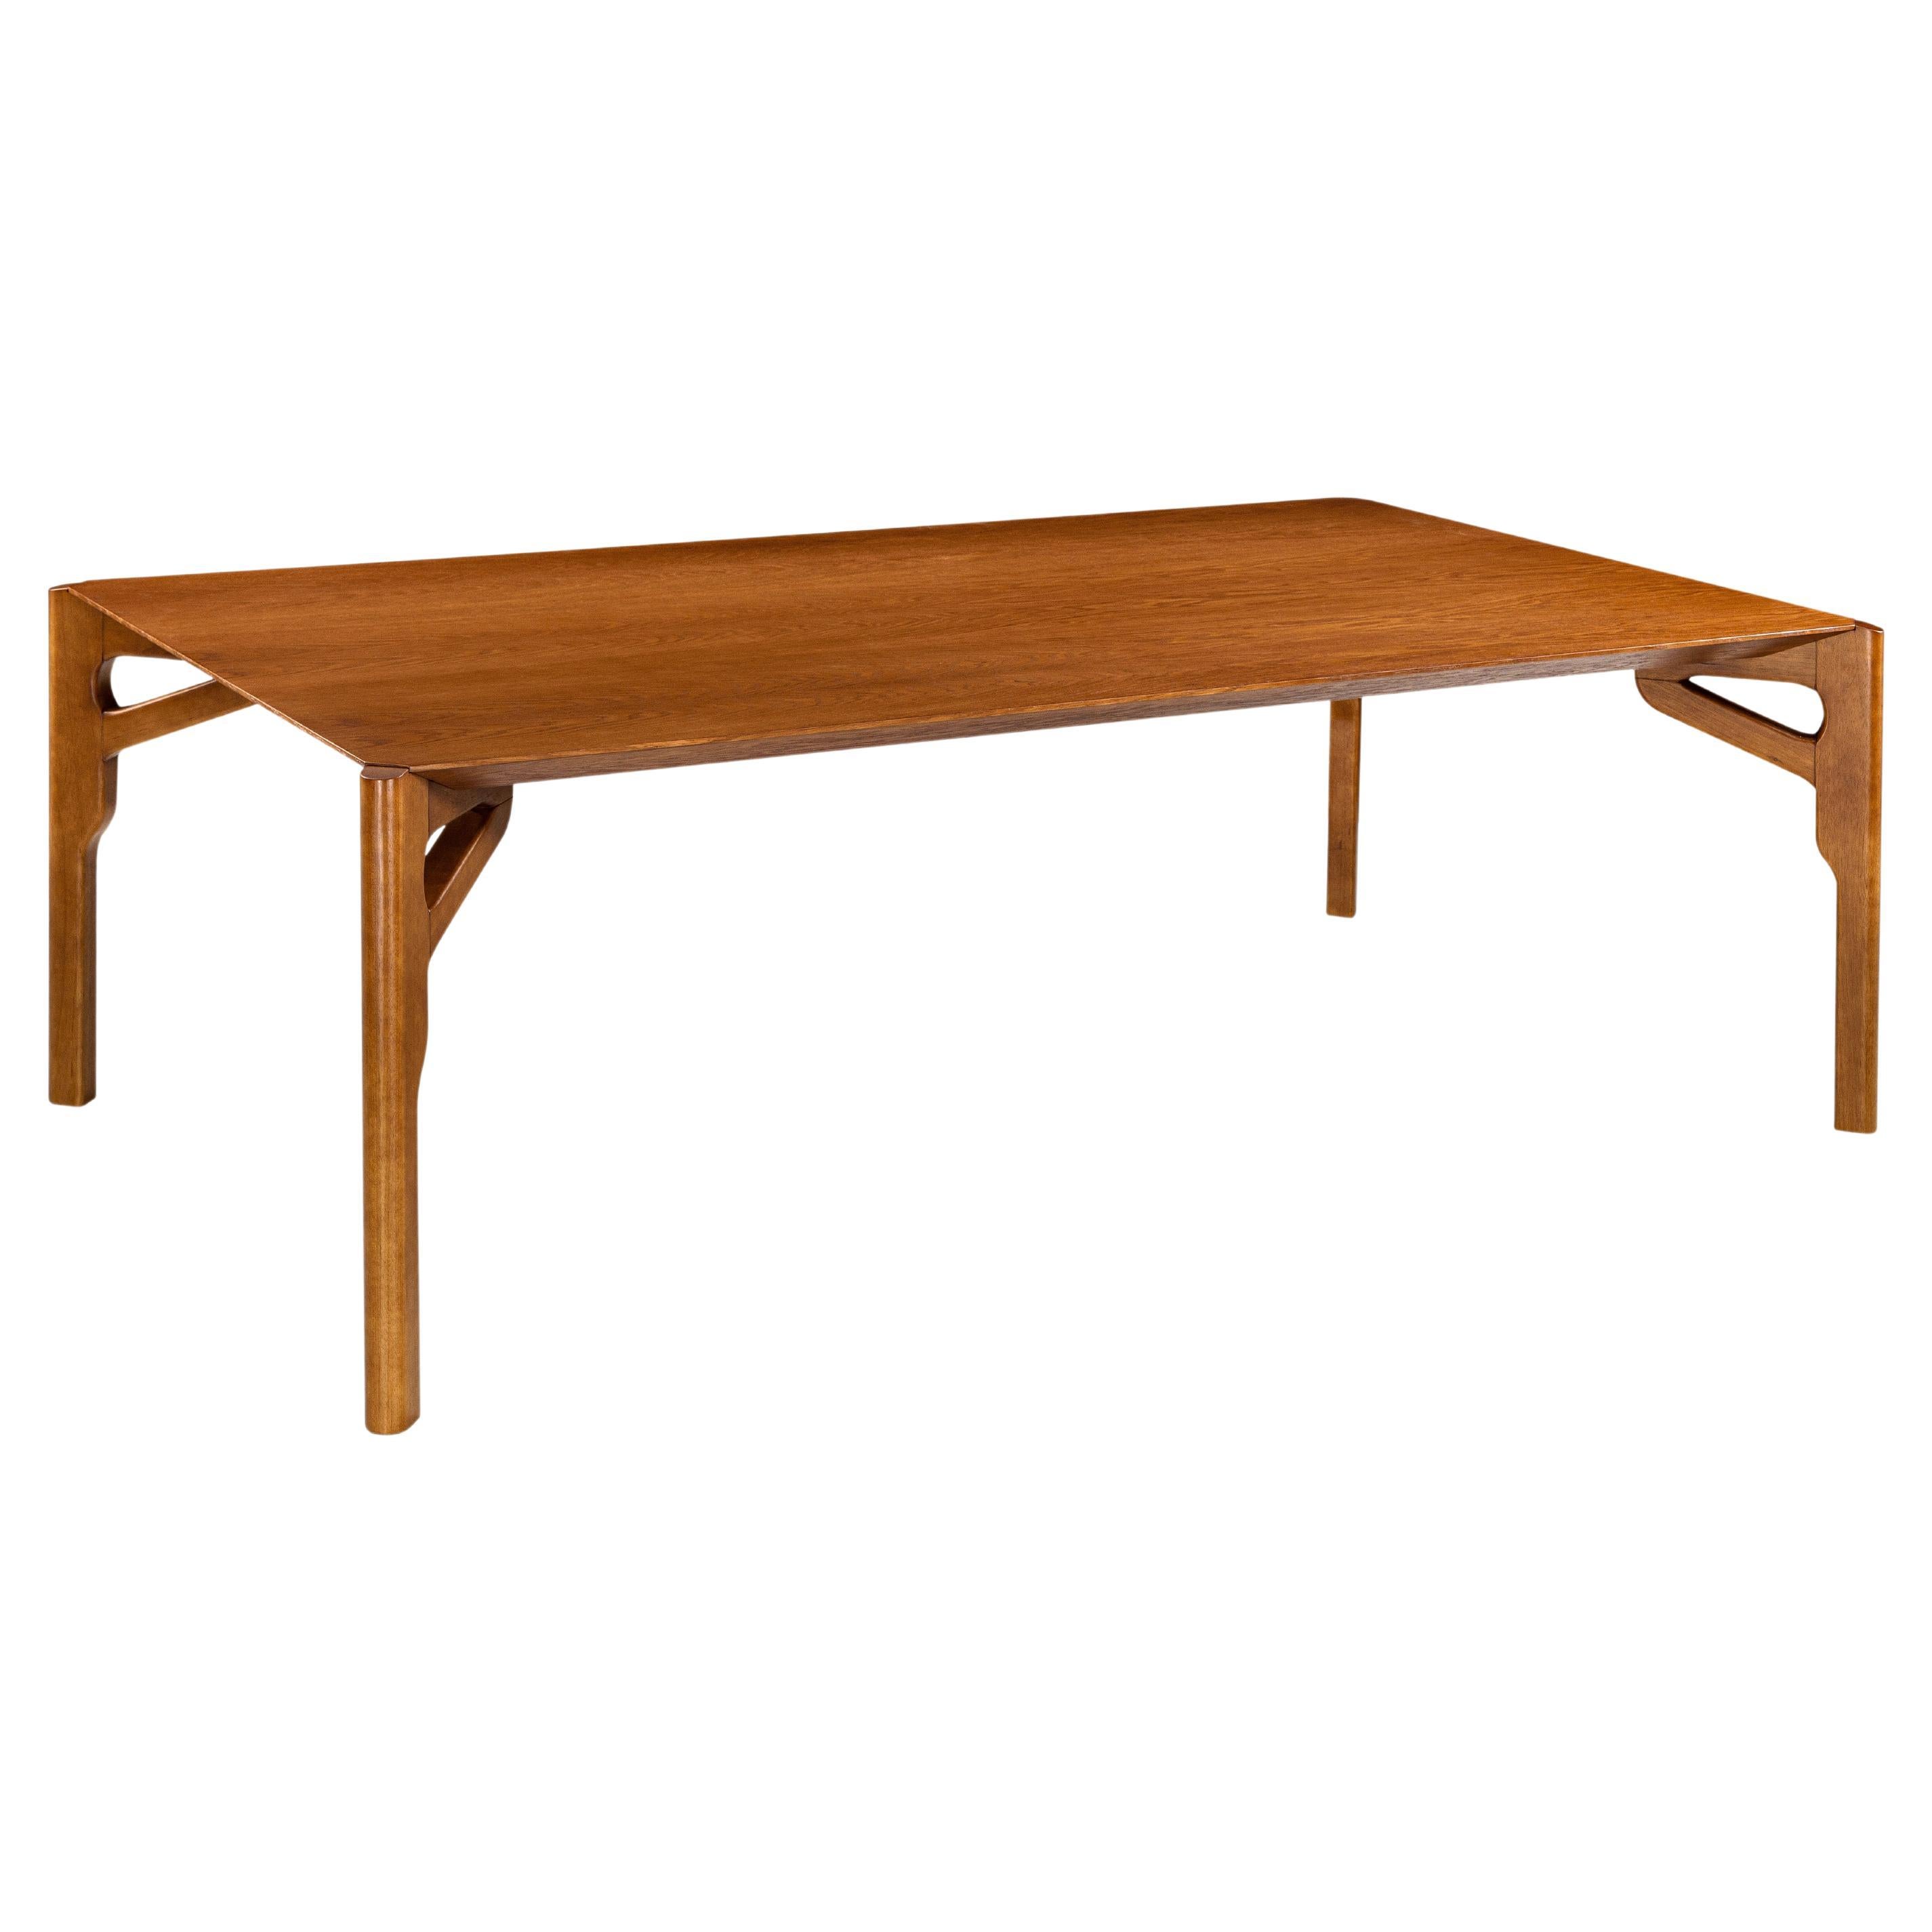 Hawk Dining Table with an Almond Oak Wood Veneered Table Top 86'' For Sale